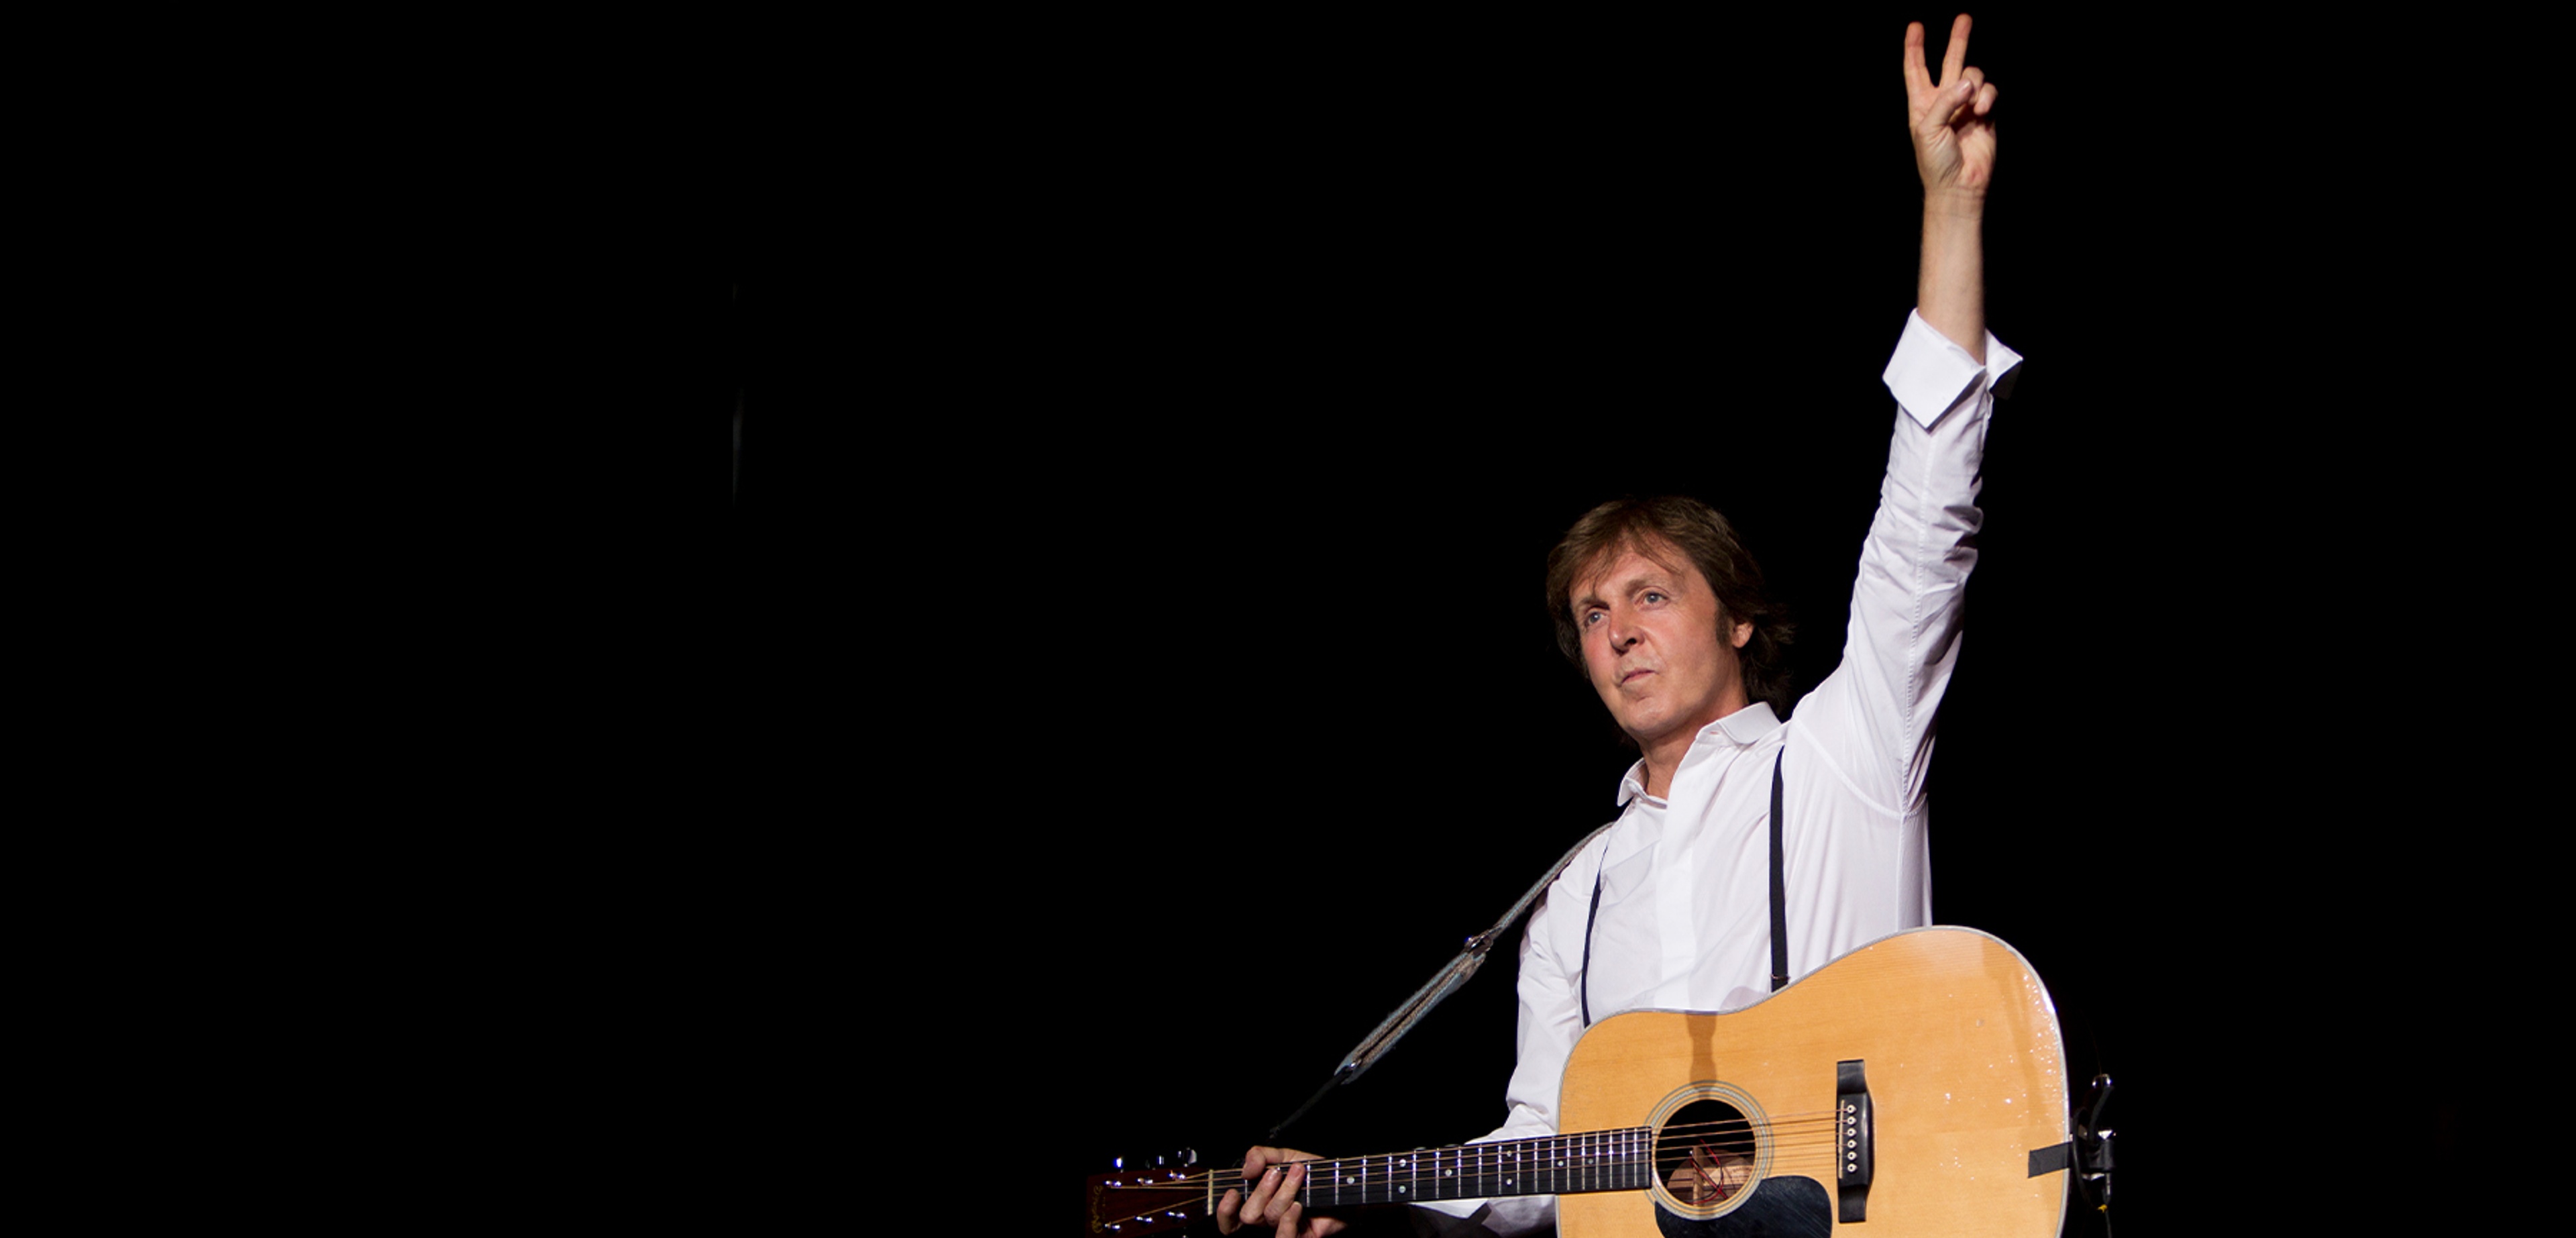 Photo of Paul throwing a peace sign used on 'On The Run' promotional assets